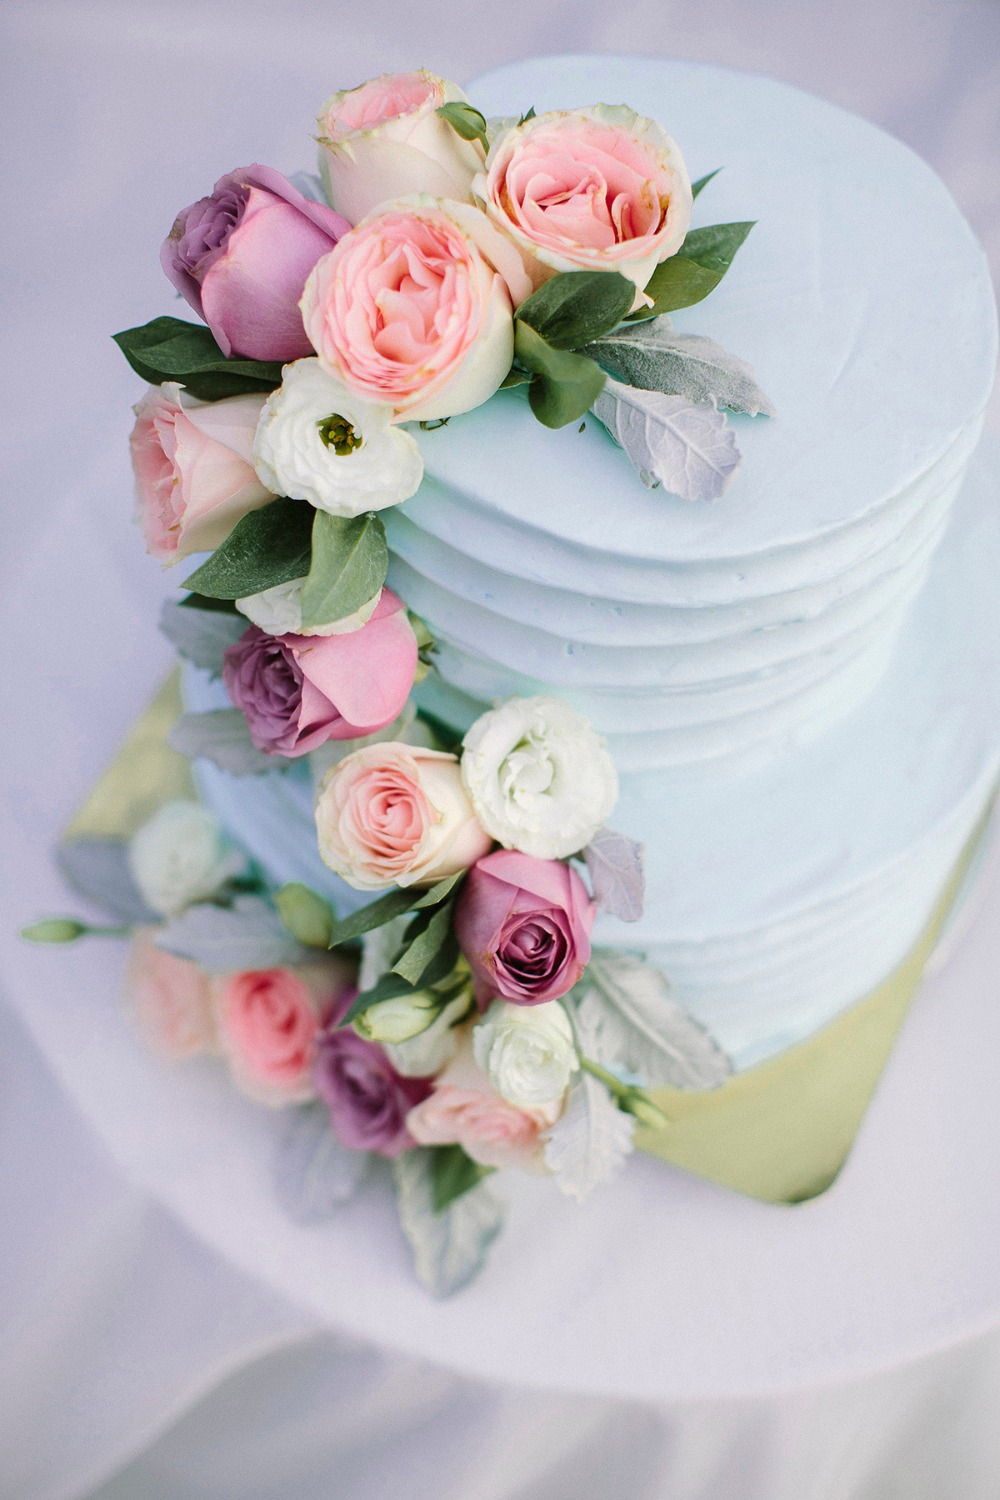 Blue wedding cake with florals